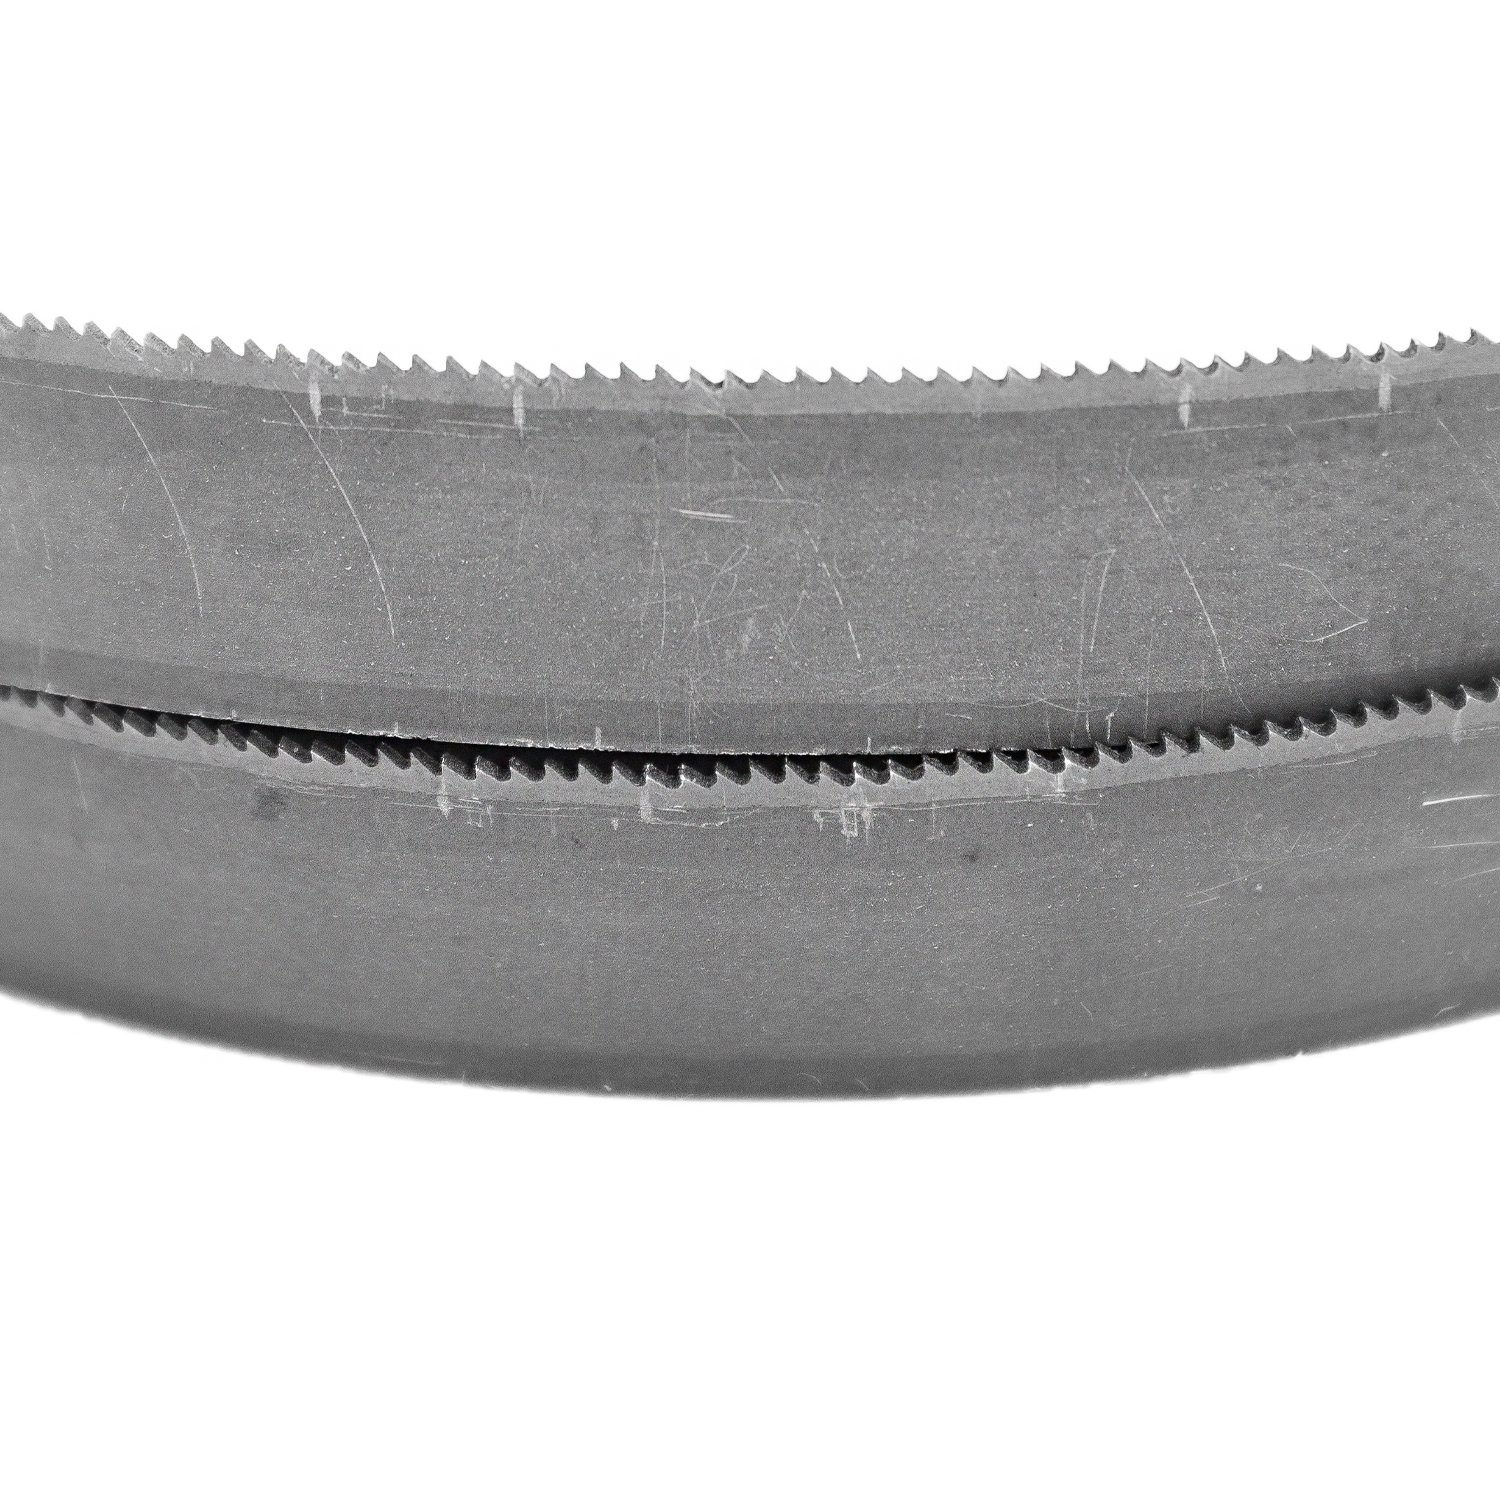 Pipeworker band saw blade 687.57mm